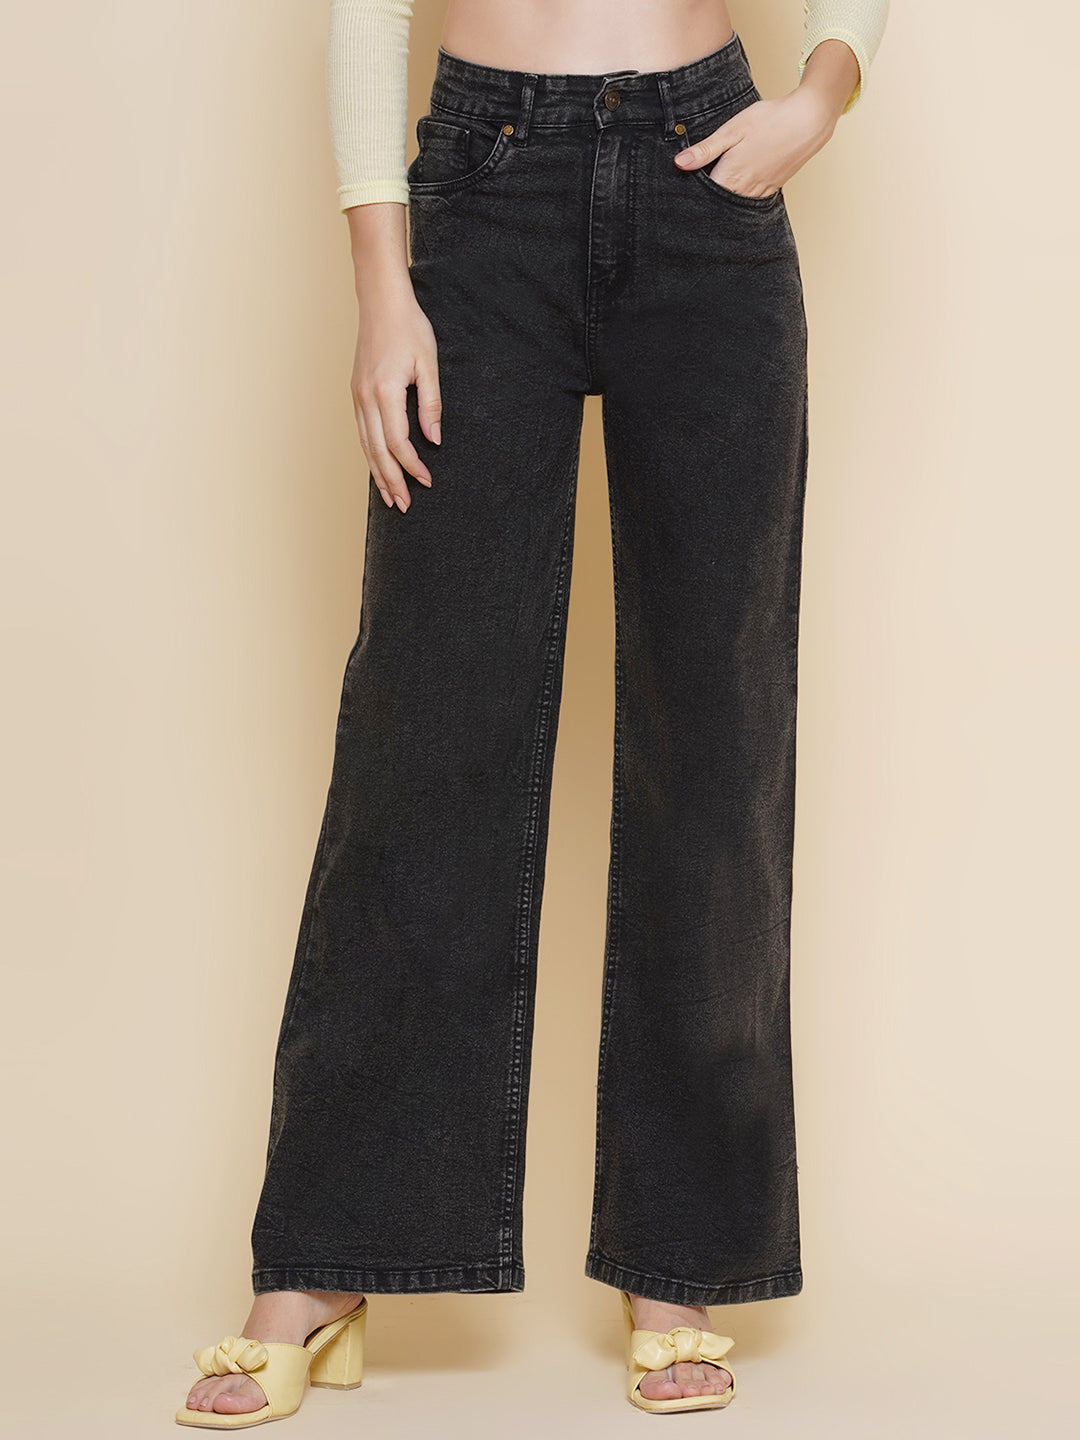 Womens Charcoal Grey Straight Fit Jeans